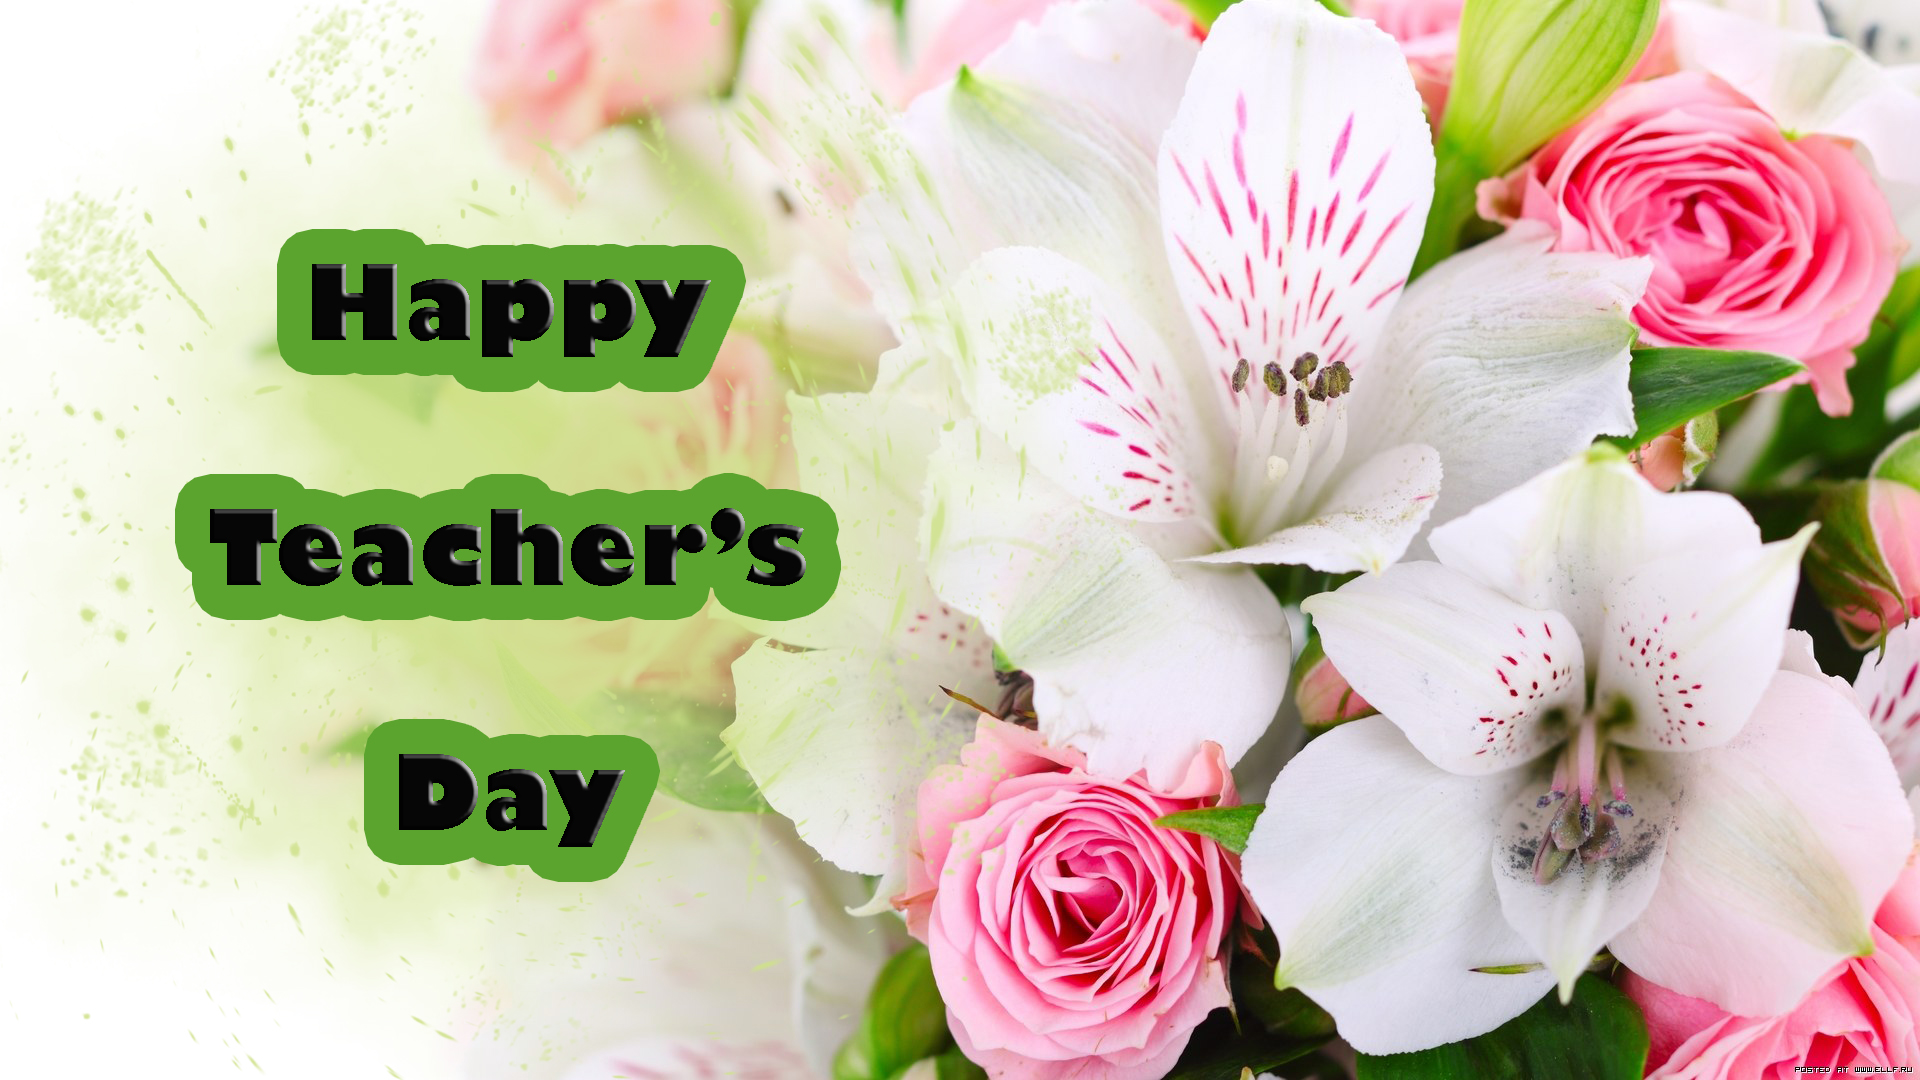 happy-teachers-day-qaTeachers-Day-Images-With-Quotes-Downloaduotes-images-wish-cards